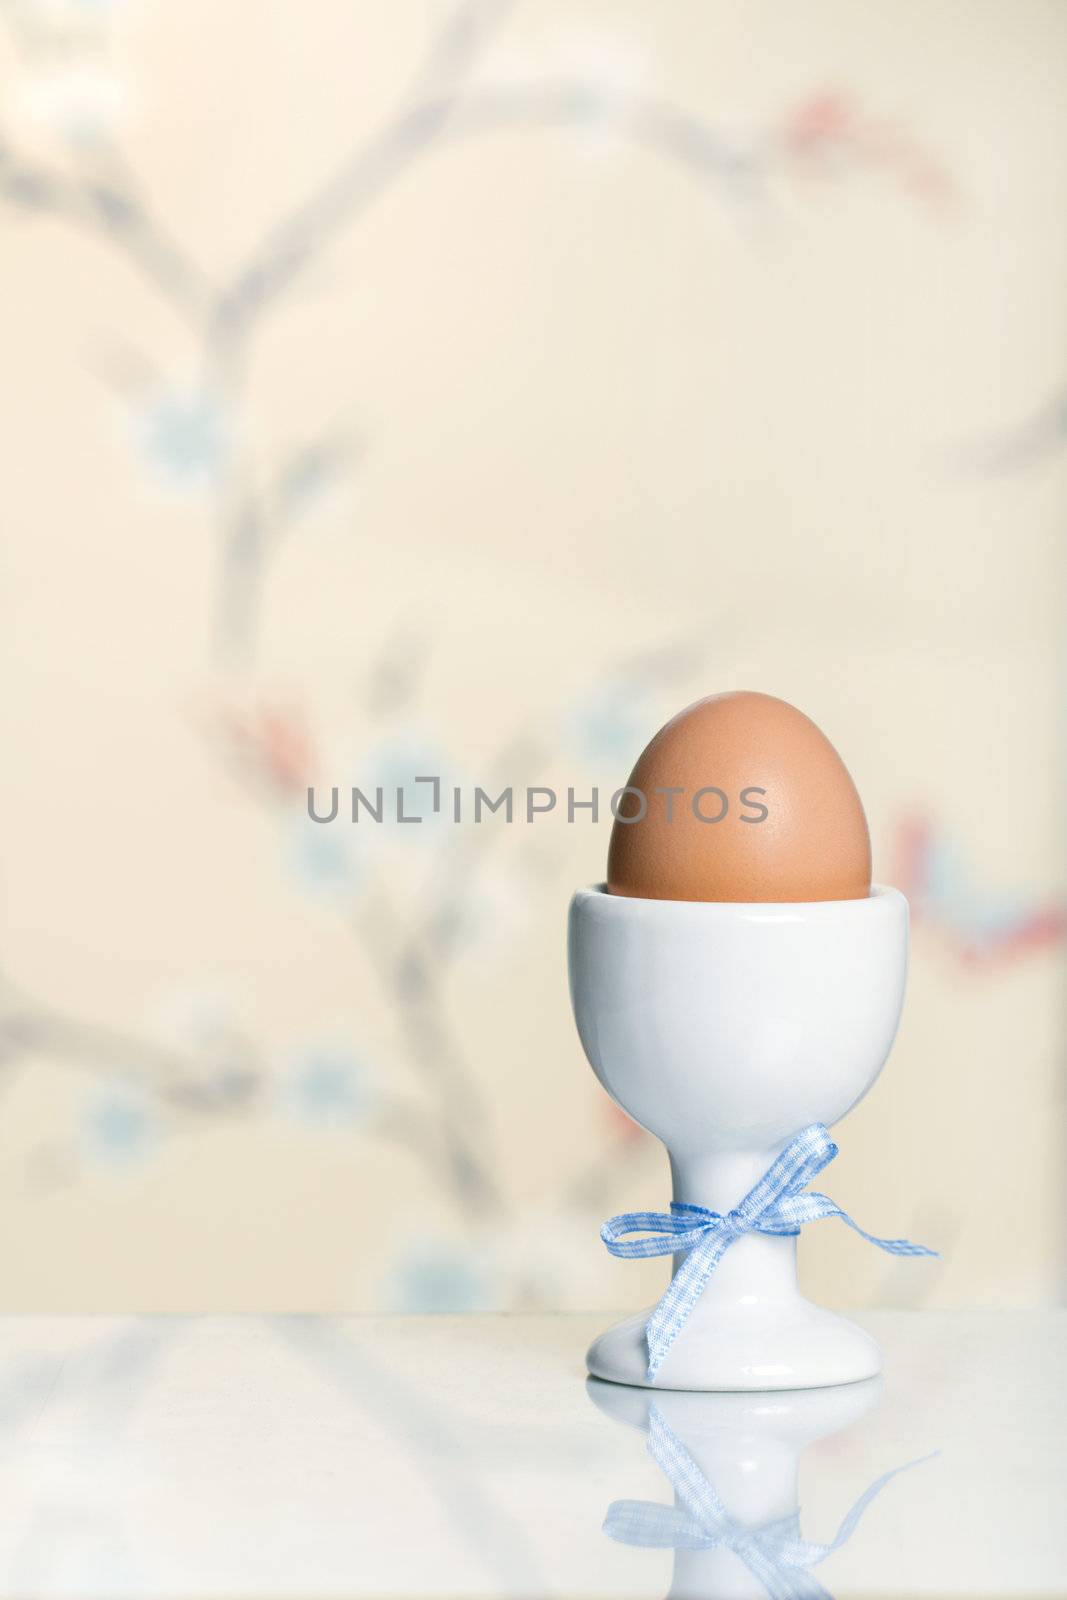 Single egg in an egg cup by RuthBlack